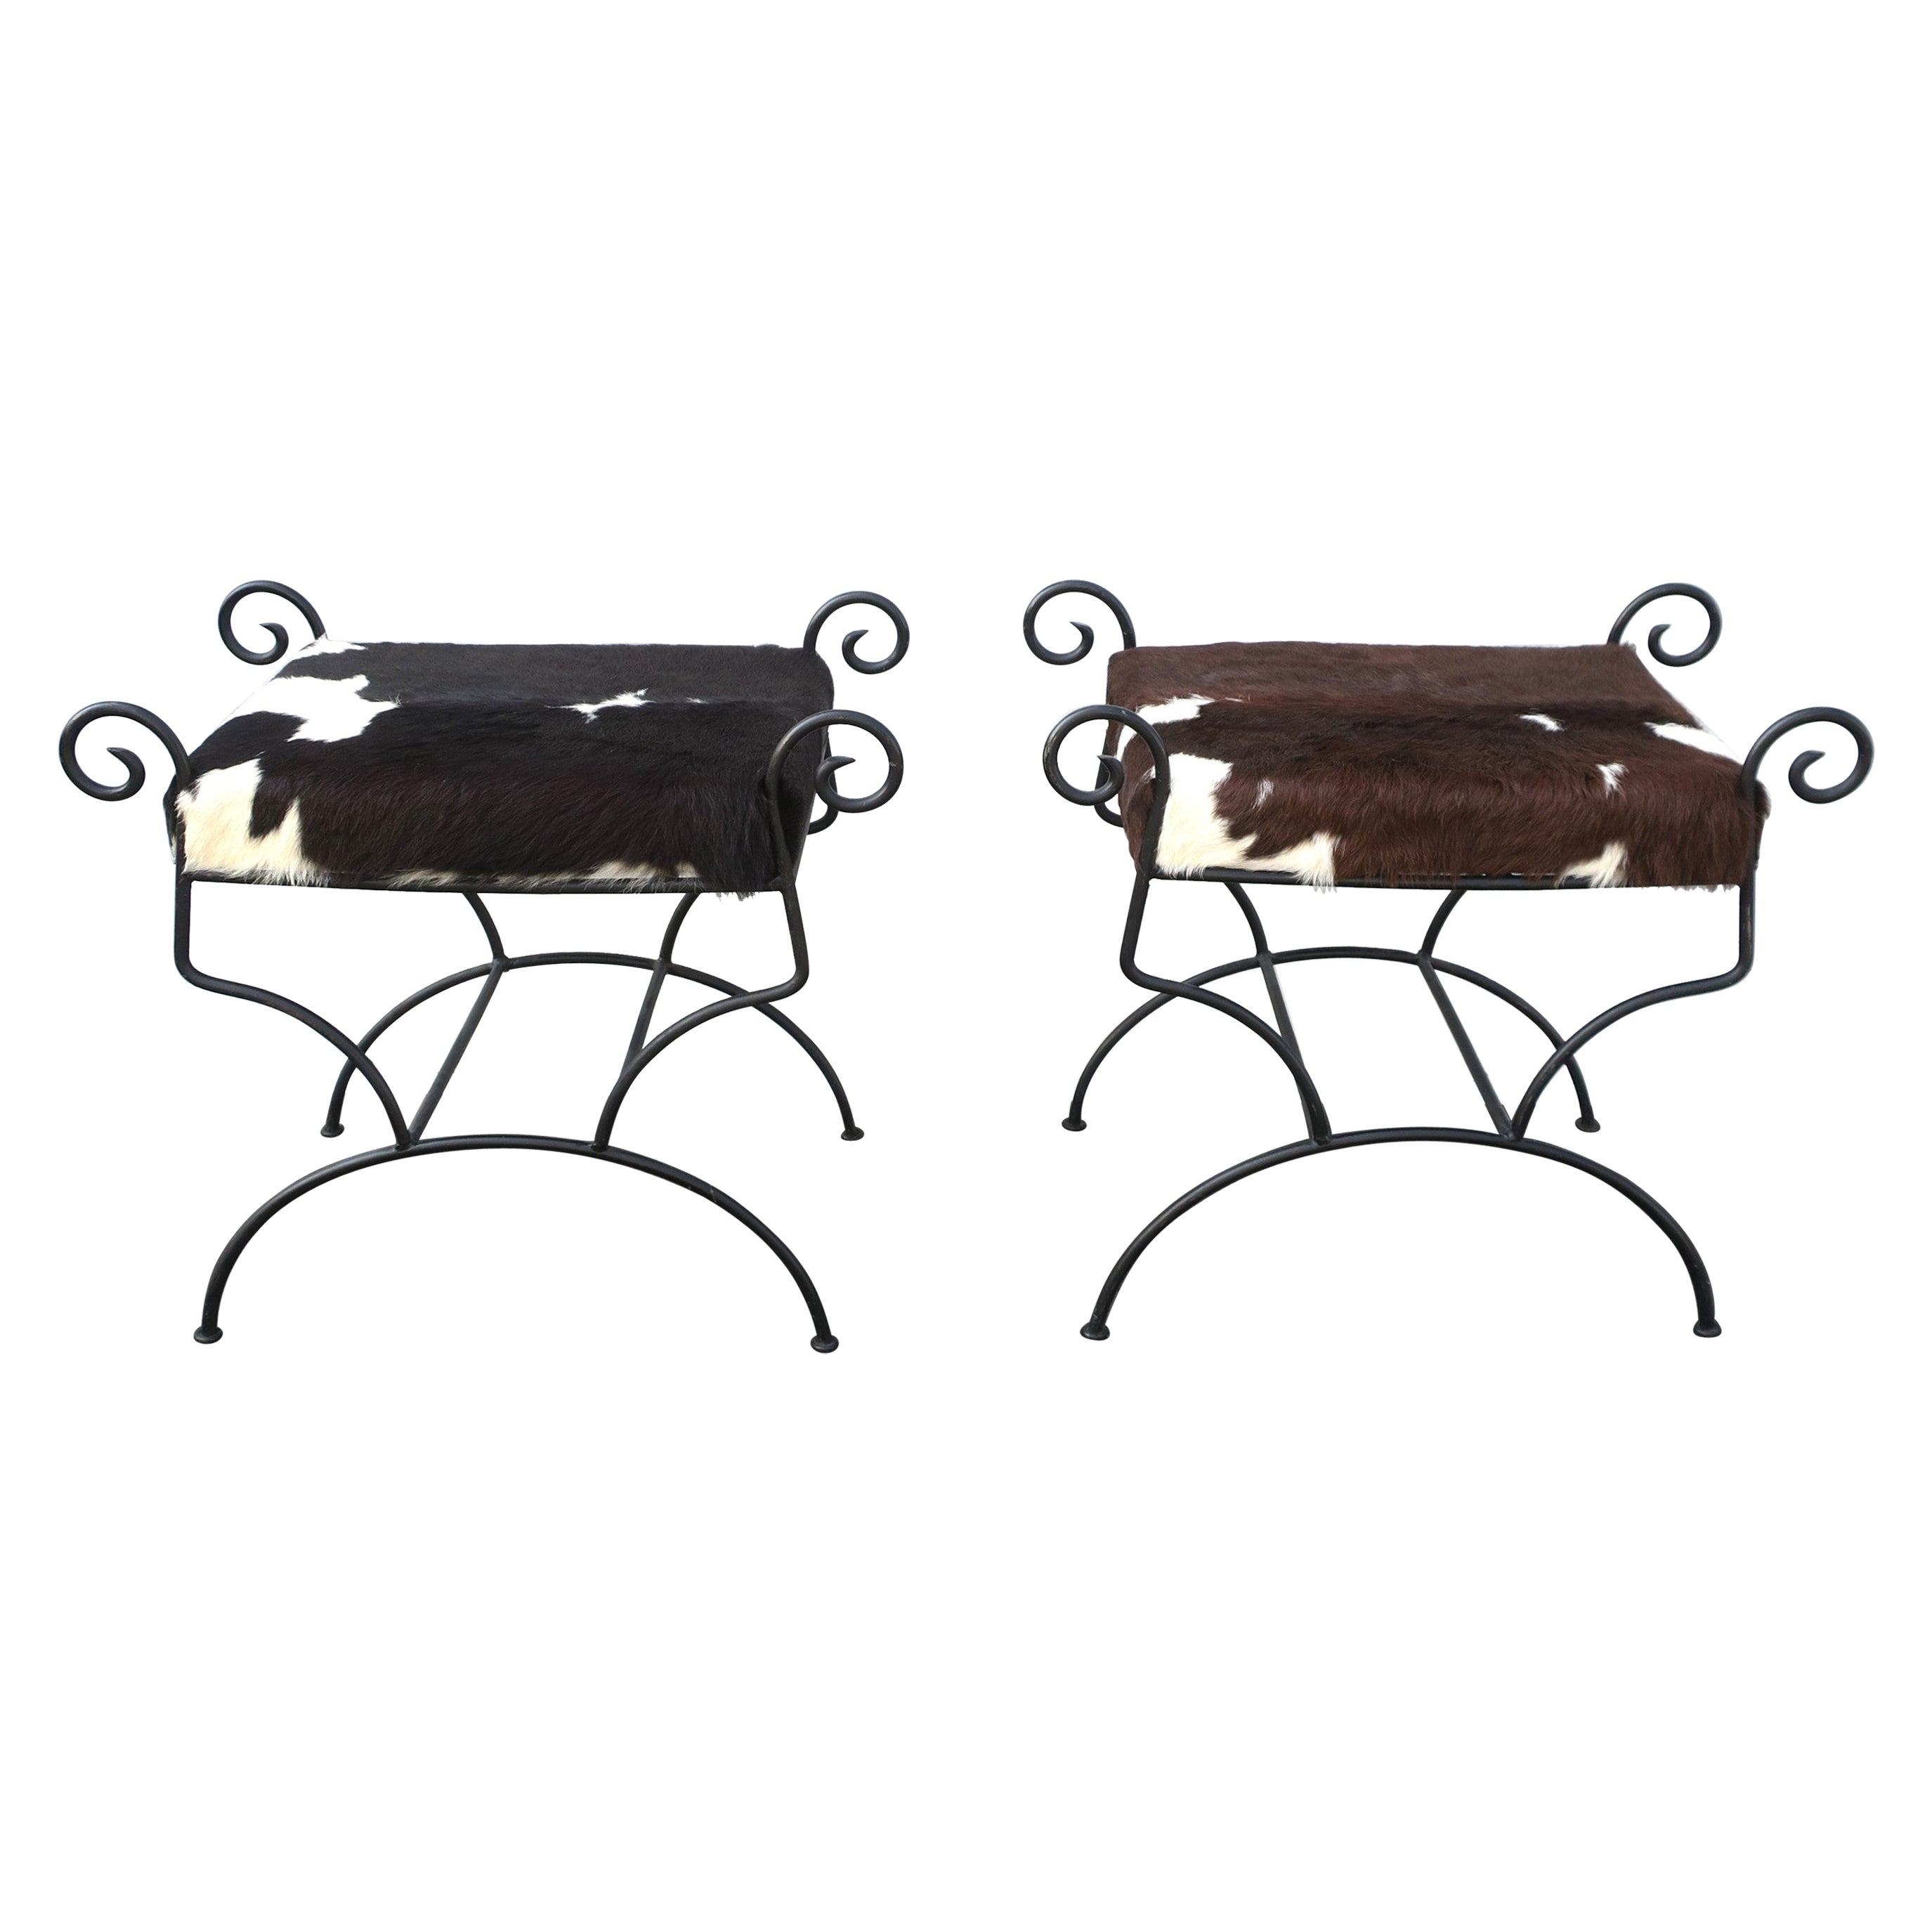 Black Wrought Iron and Hide Benches or Stools, Pair